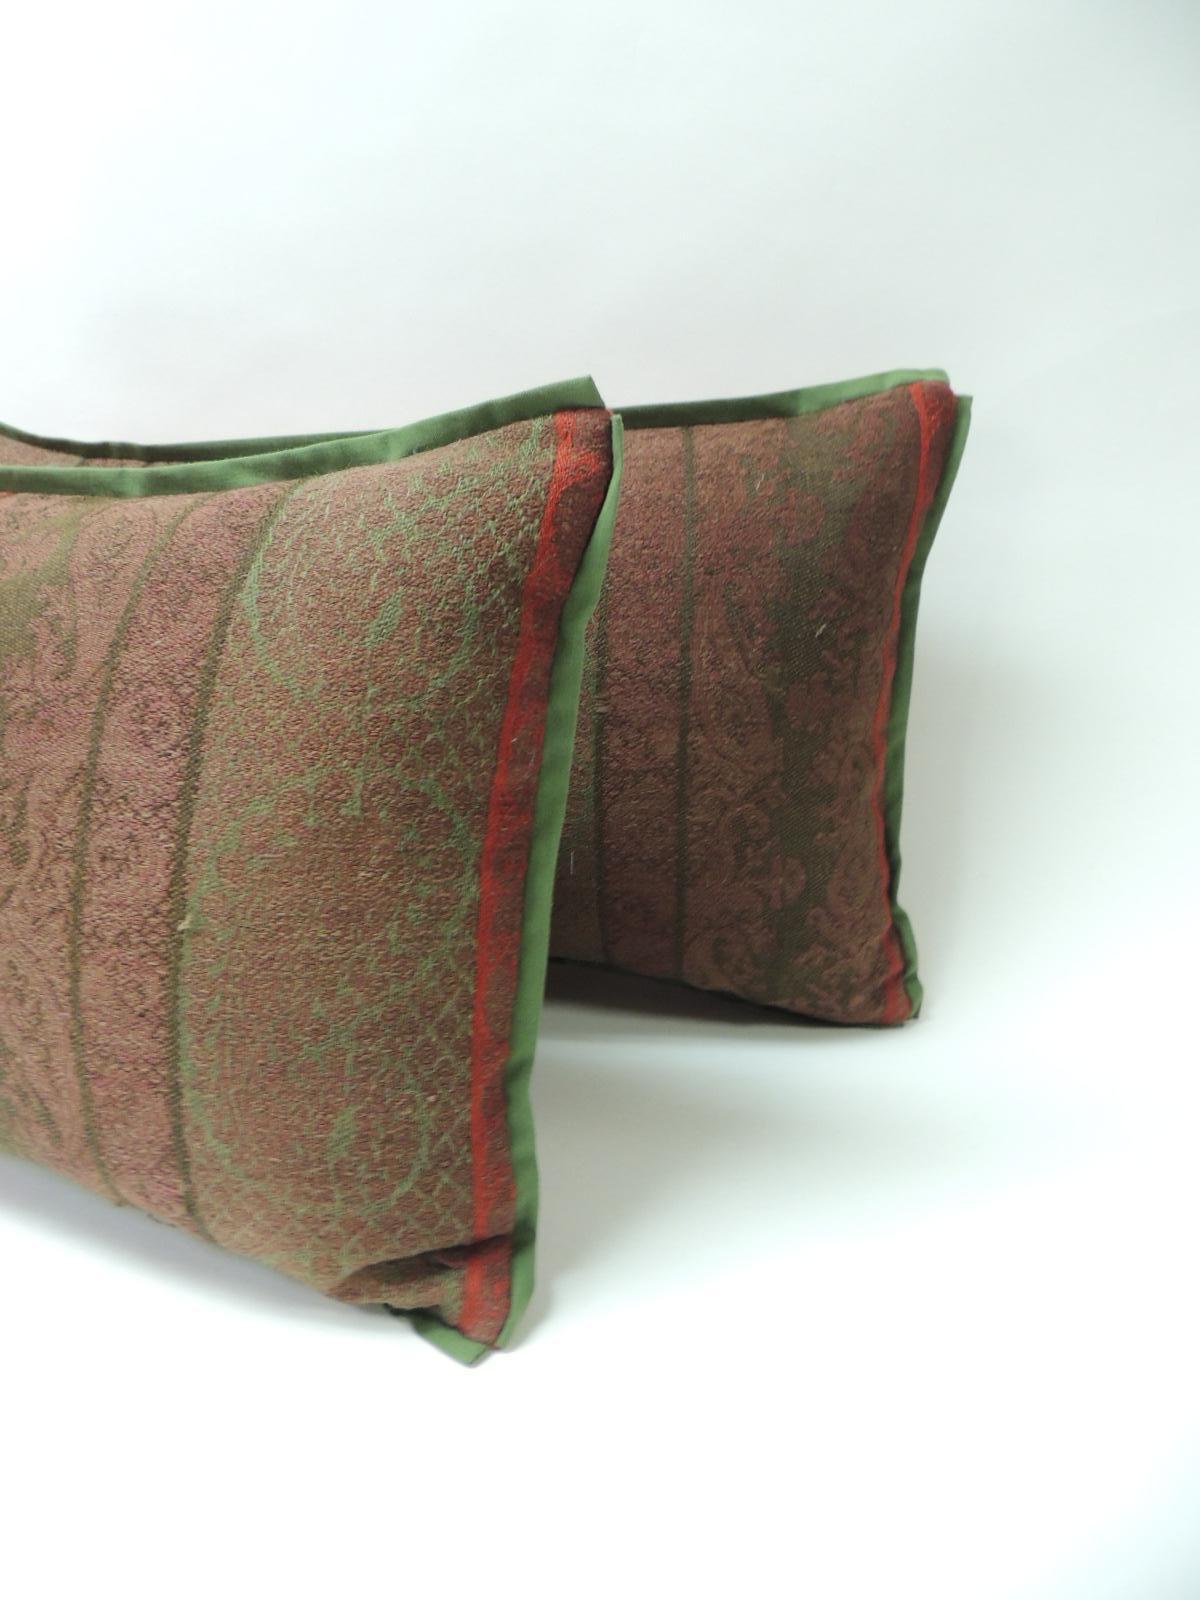 Hand-Crafted Pair of 19th Century Antique Woven Kashmir Paisley Decorative Lumbar Pillows